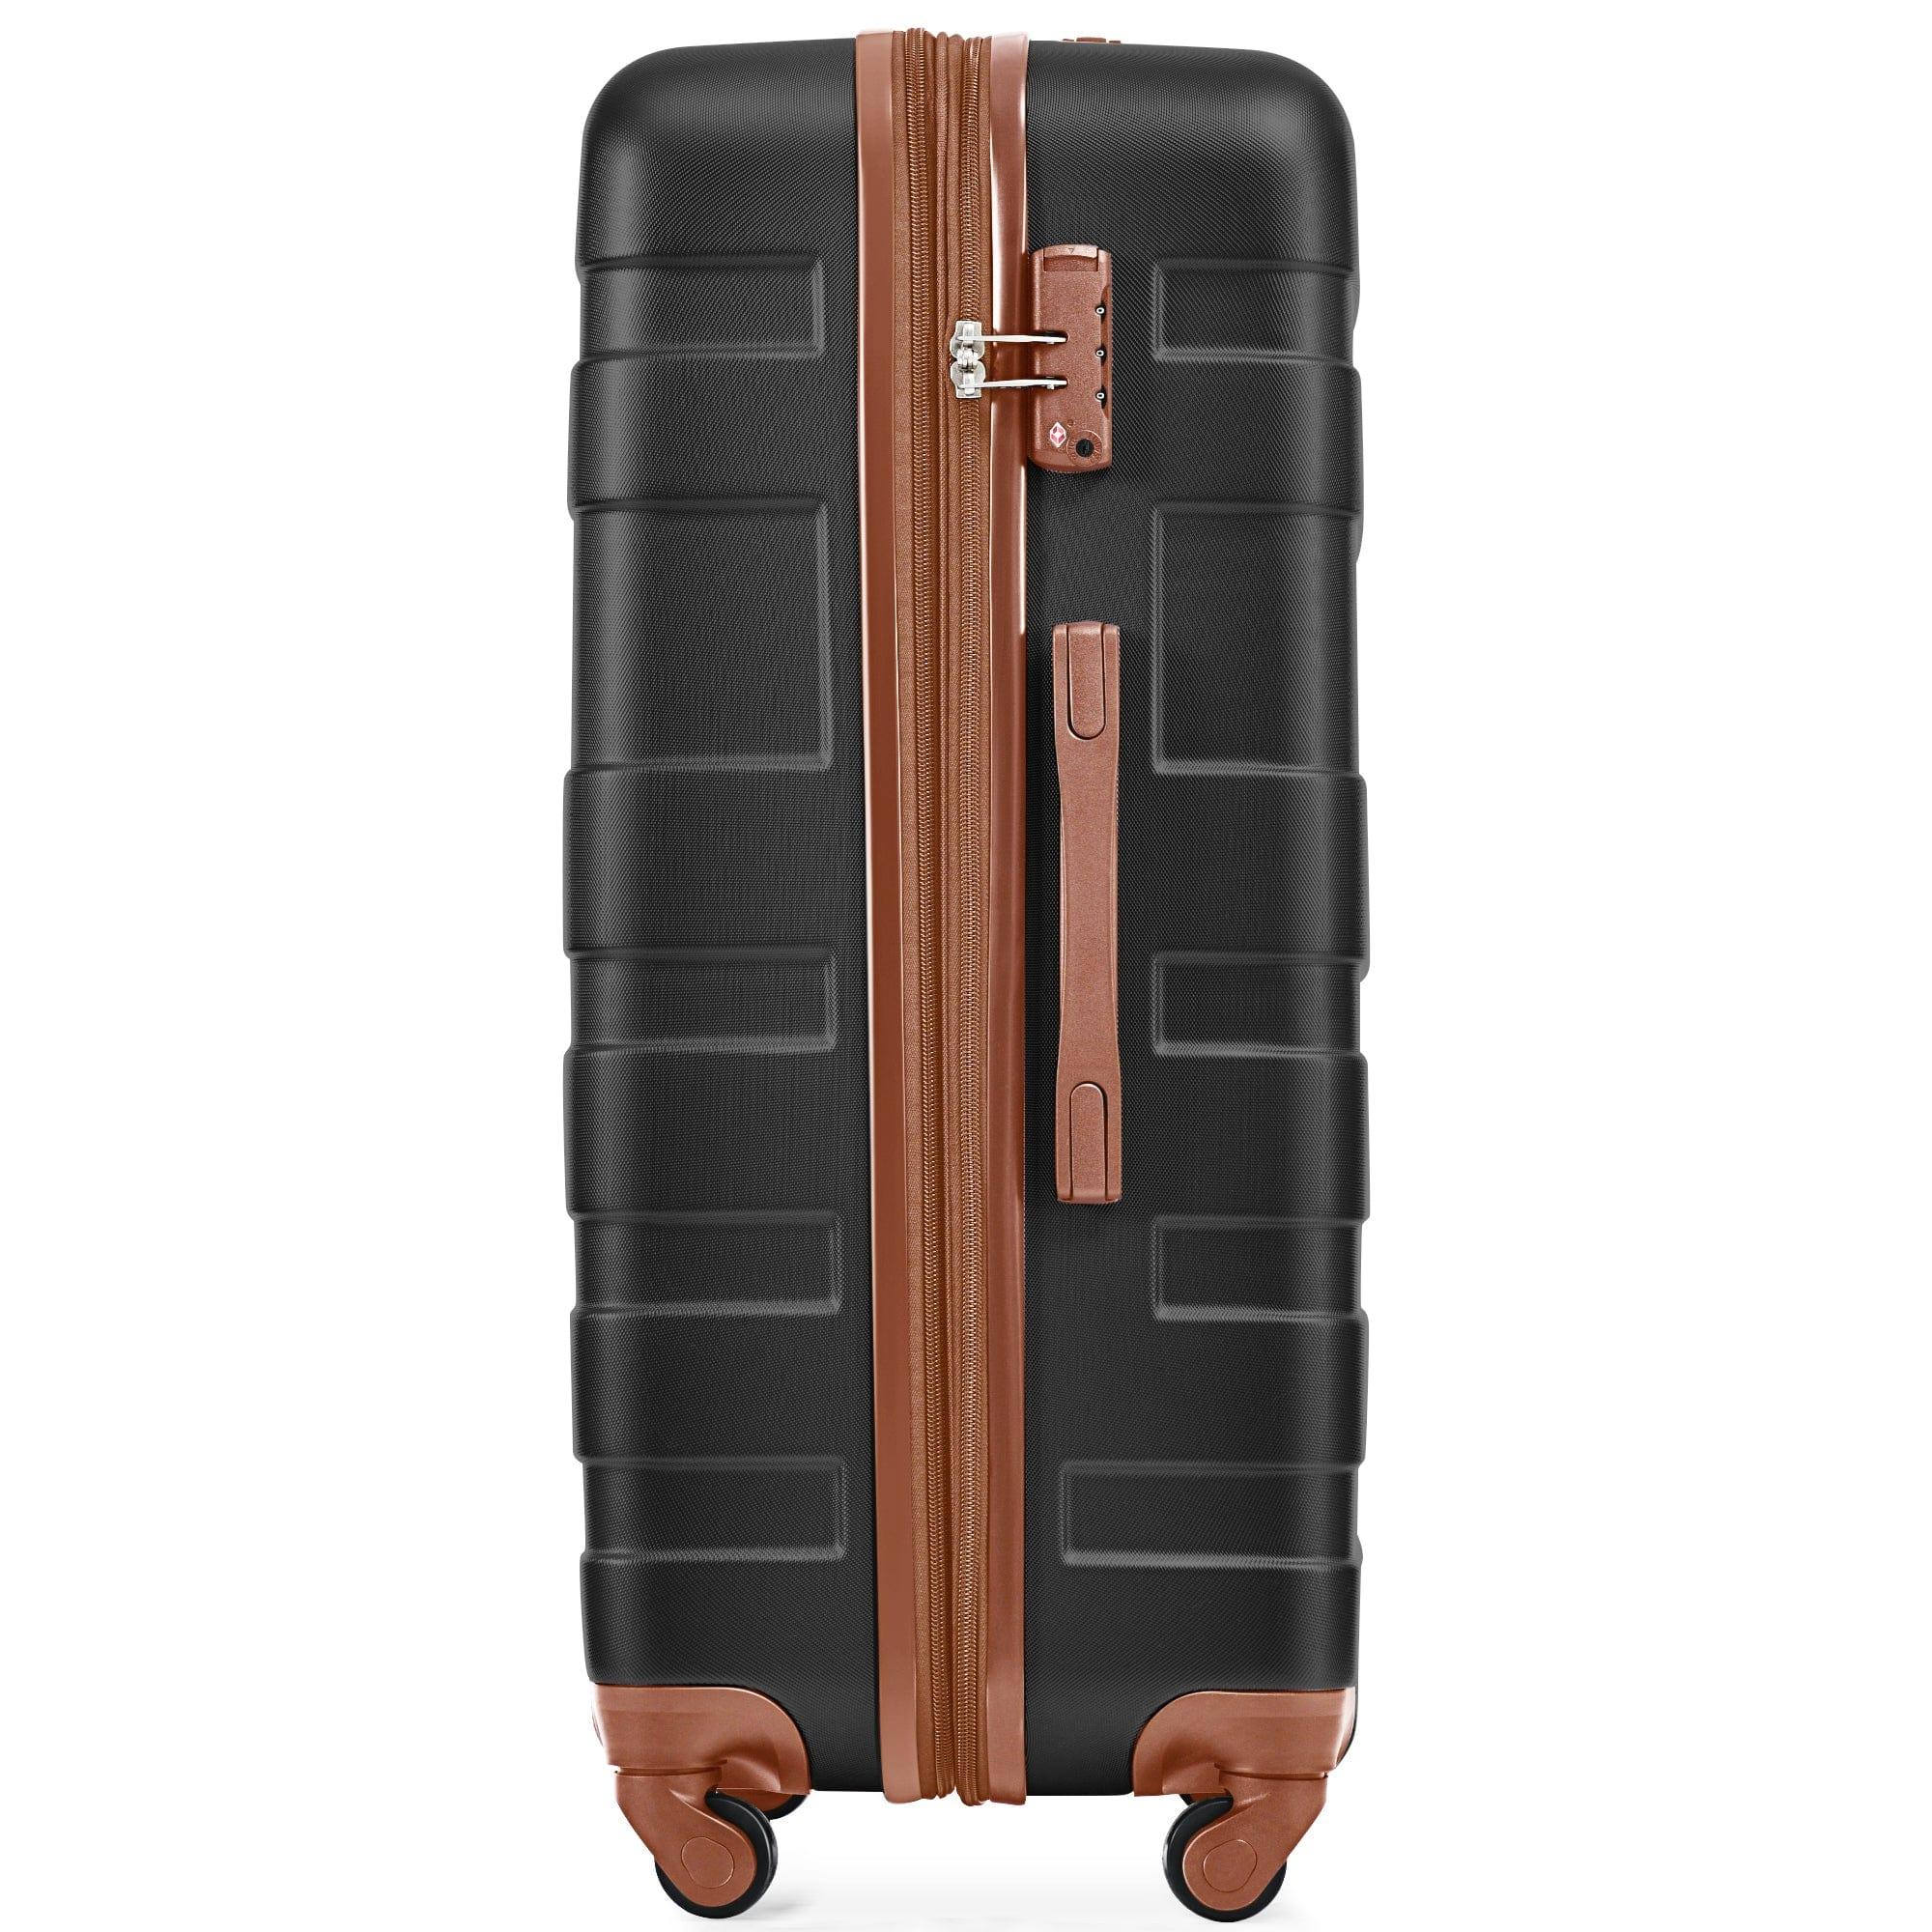 Shop Luggage Sets New Model Expandable ABS Hardshell 3pcs Clearance Luggage Hardside Lightweight Durable Suitcase sets Spinner Wheels Suitcase with TSA Lock 20''24''28''(black and brown) Mademoiselle Home Decor